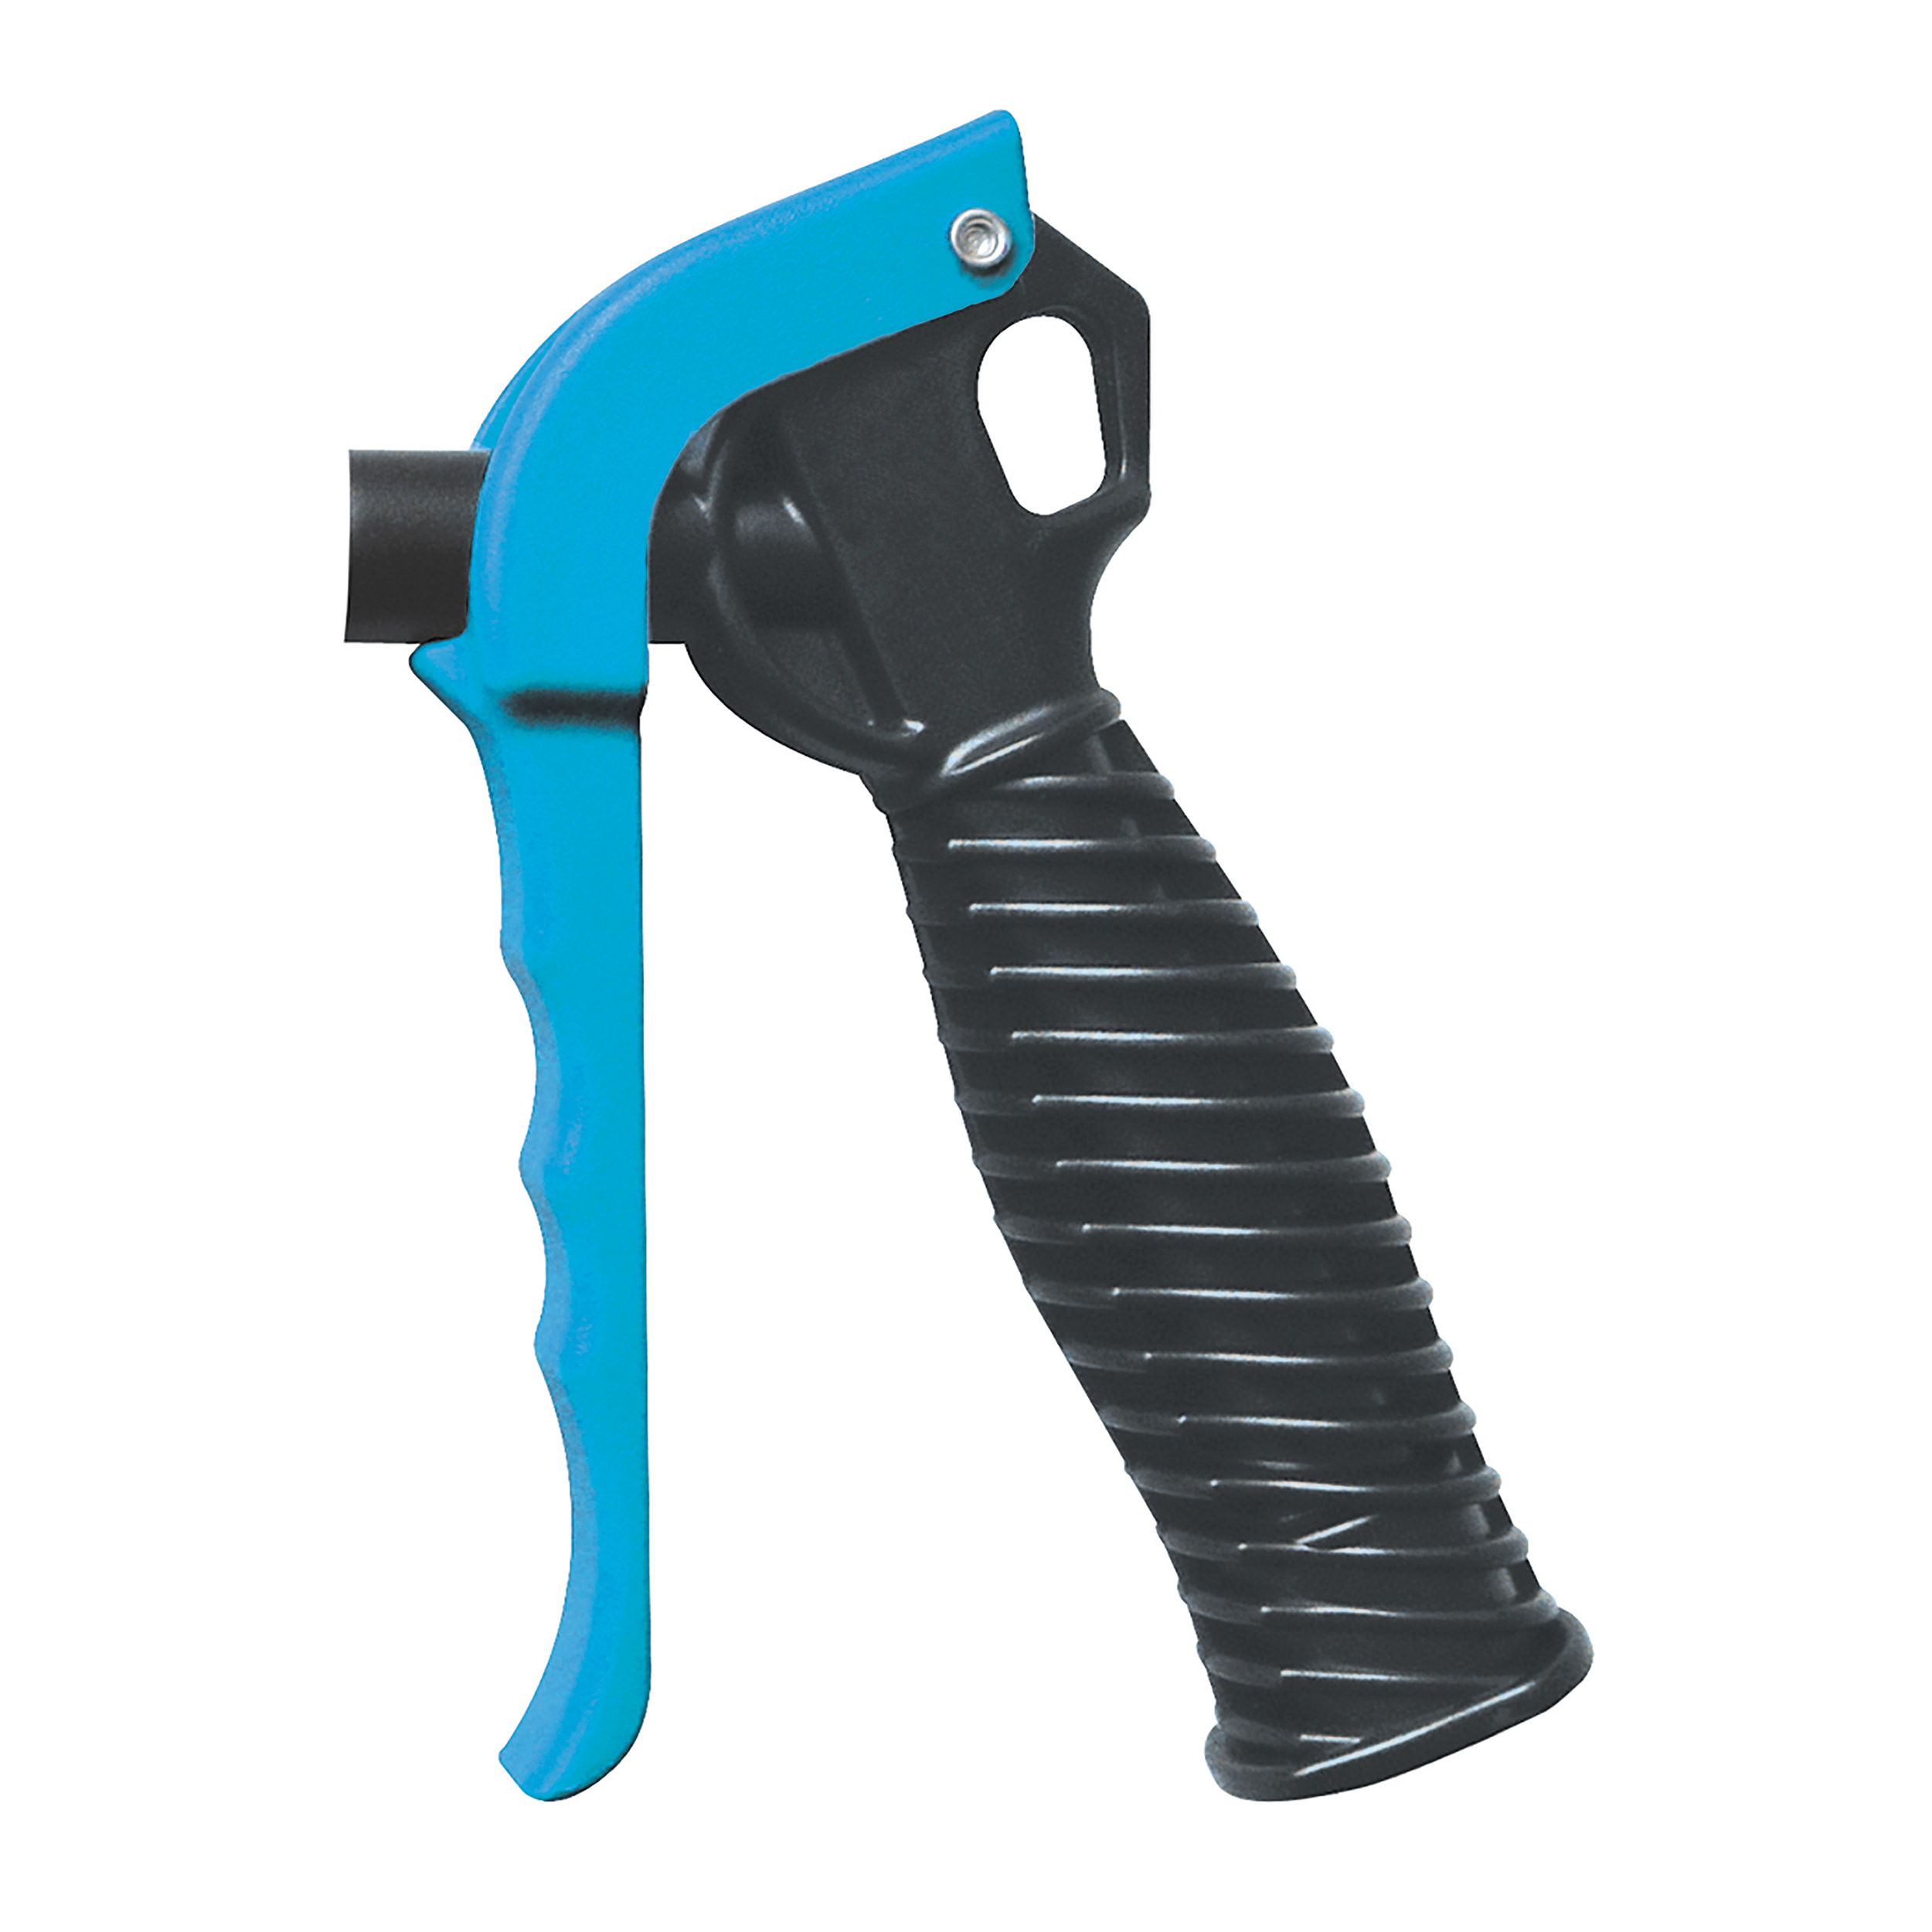 Blow gun multiblow, plastic (POM), inlet: G¼ f, outlet (nozzle): M12 × 1.25 f, max. operating pressure: 217.5 psi, weight: 75 g